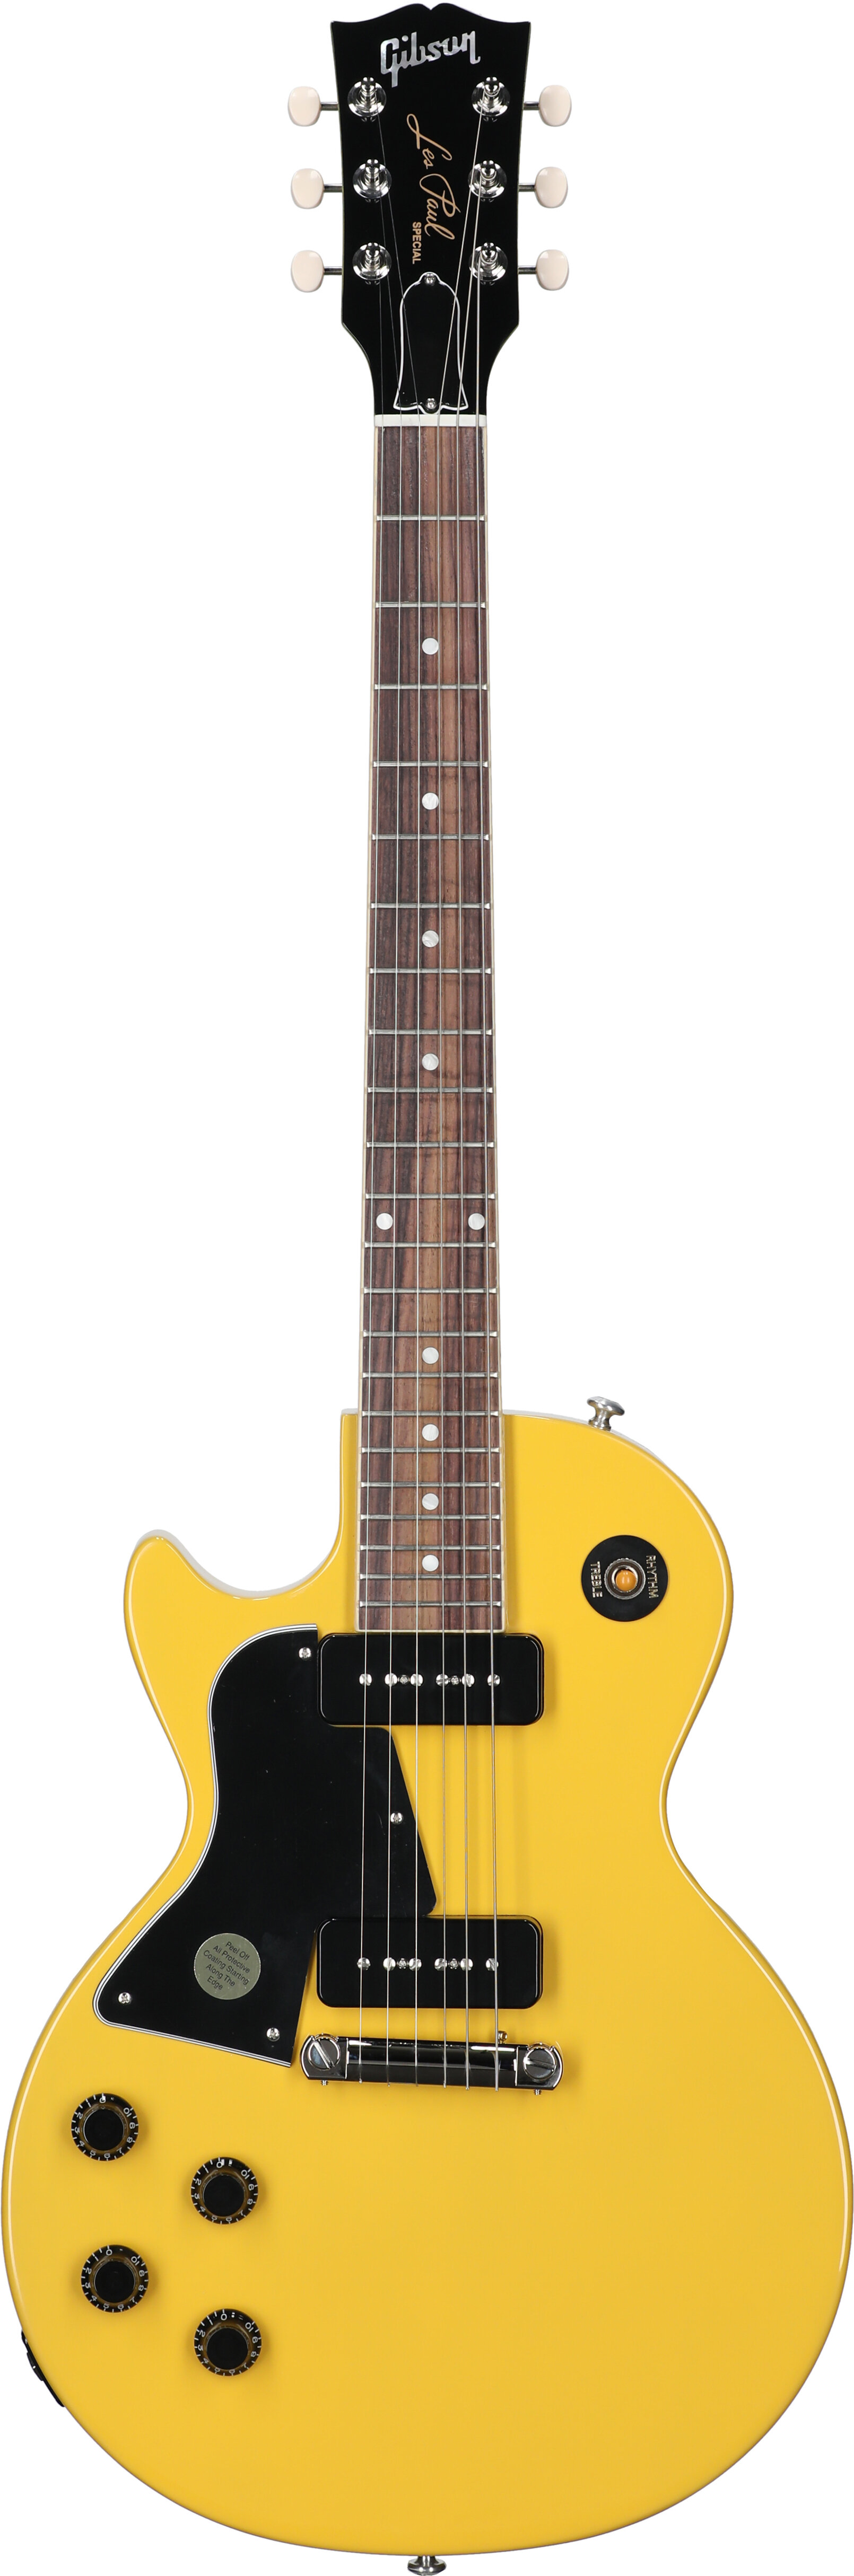 Gibson Les Paul Special Lefty TV Yellow W/C -  LPSP00LTVNH1